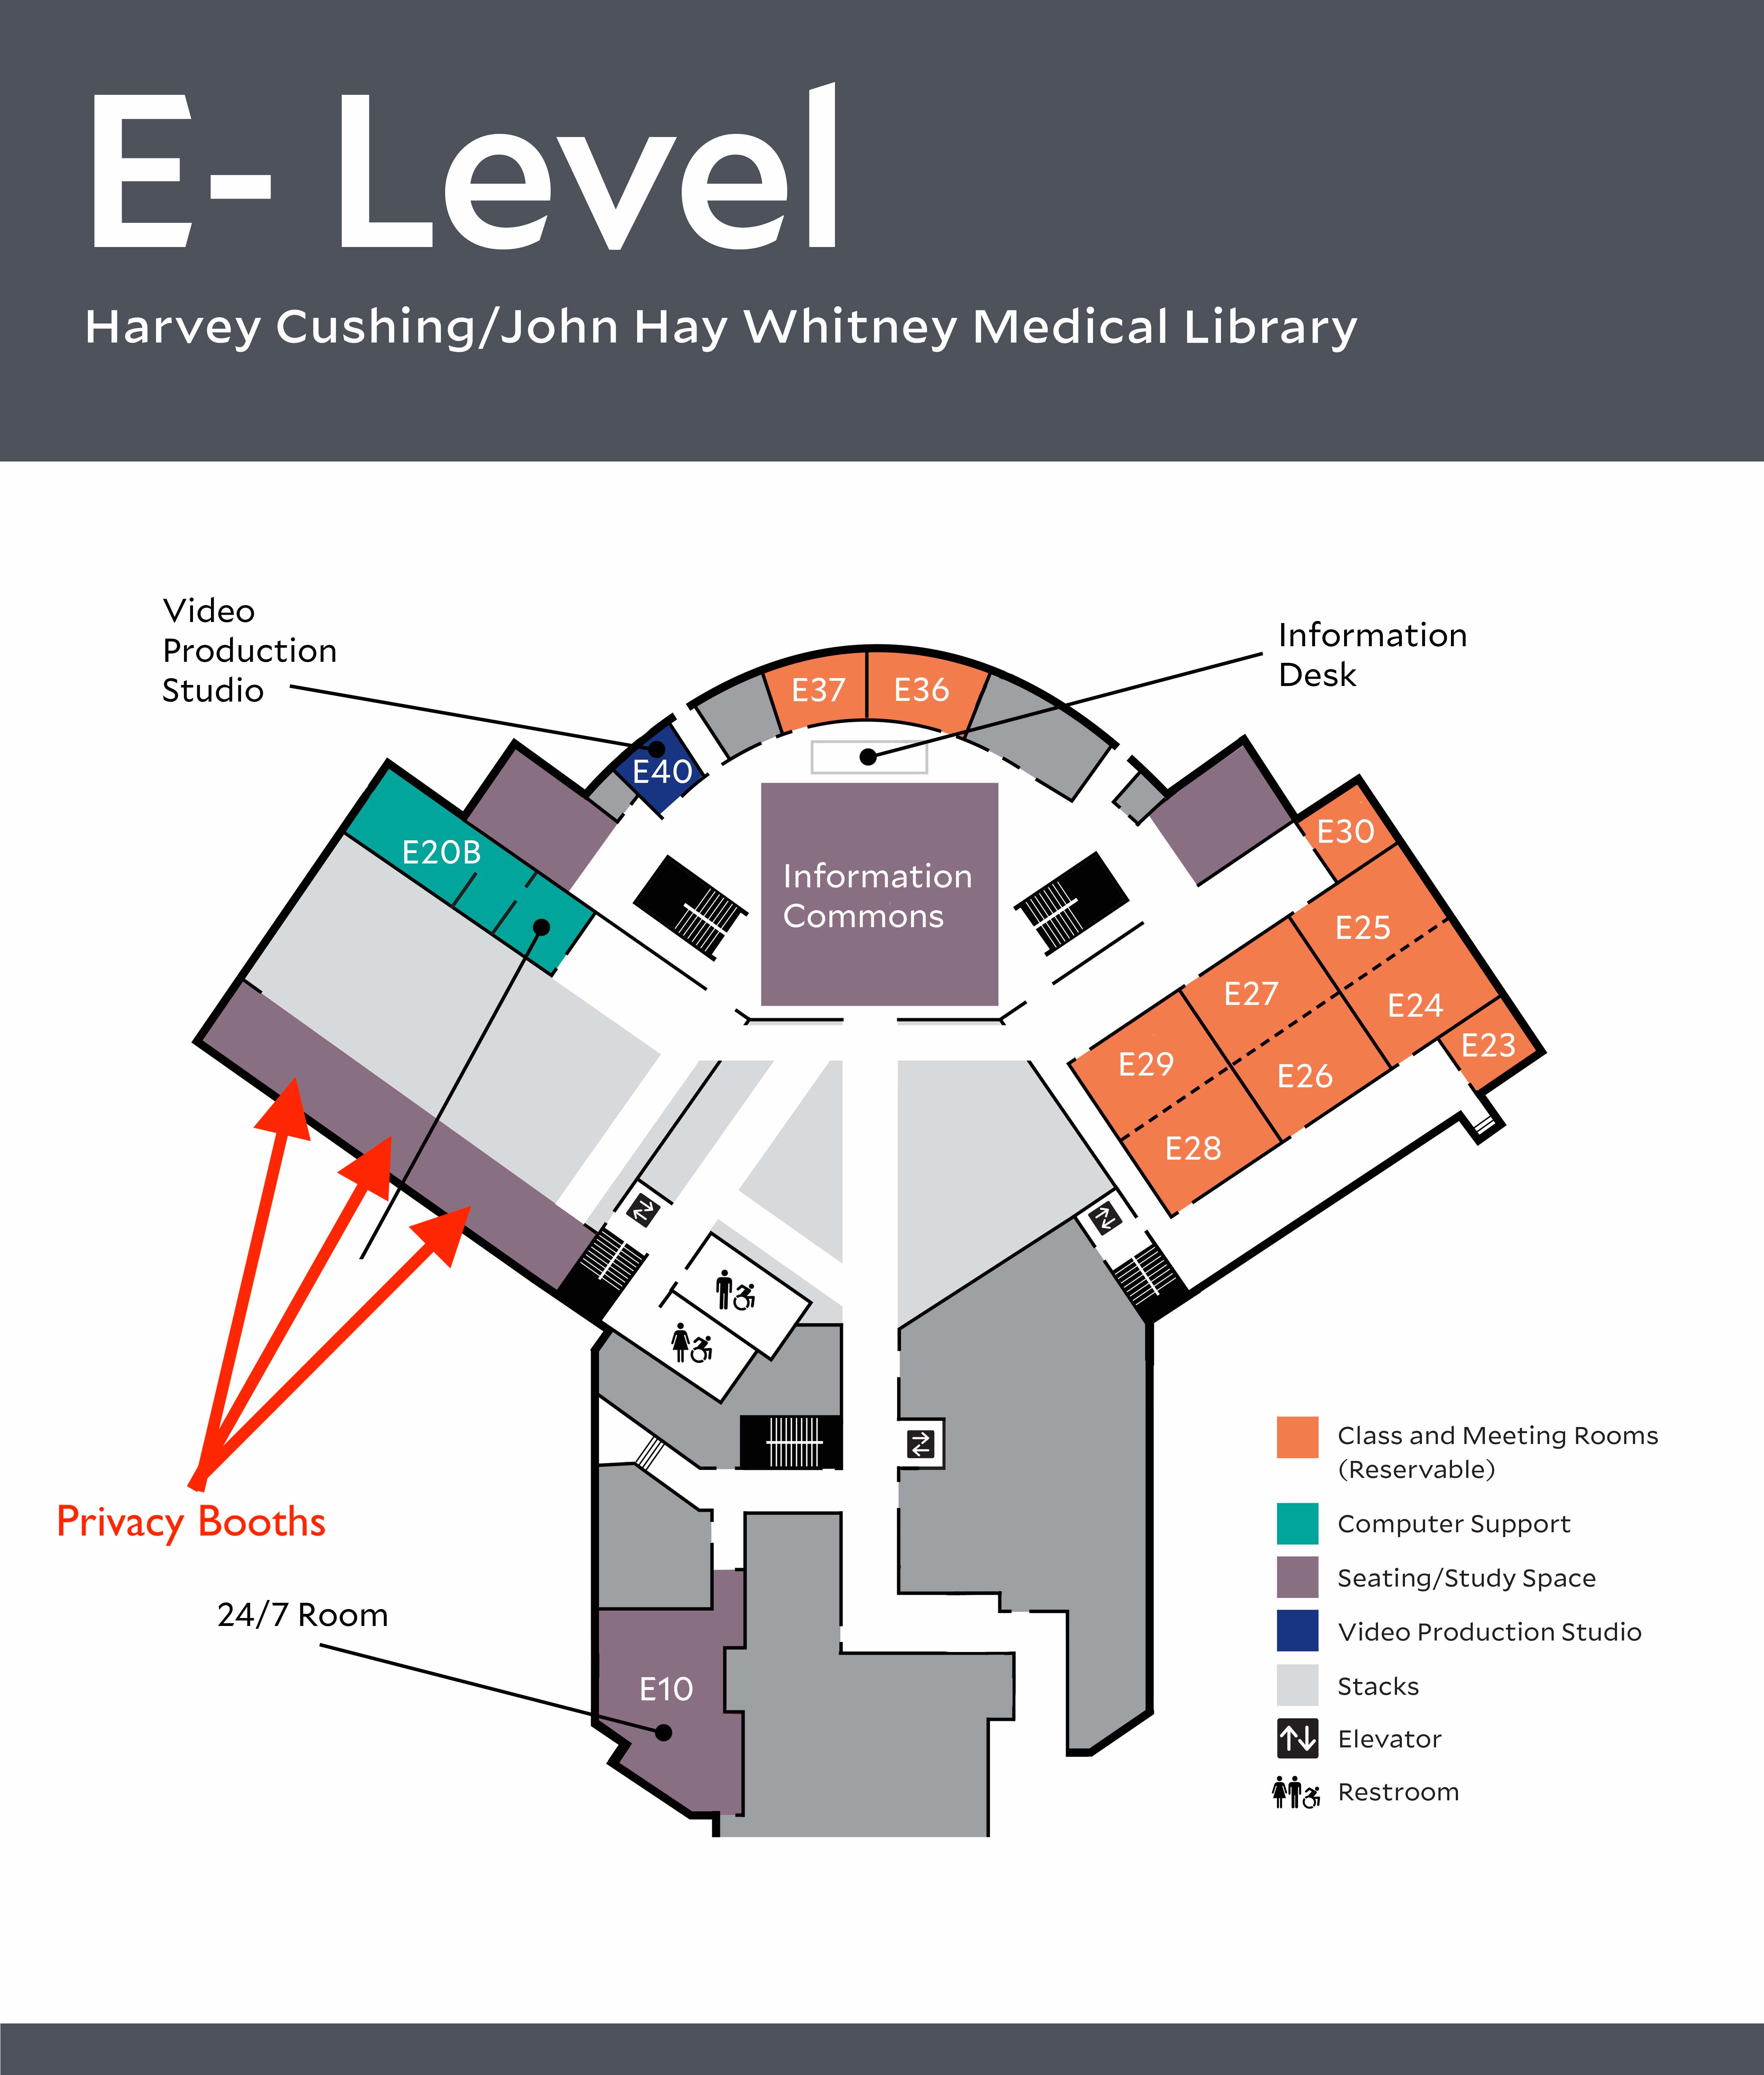 e-level map showing privacy booth location